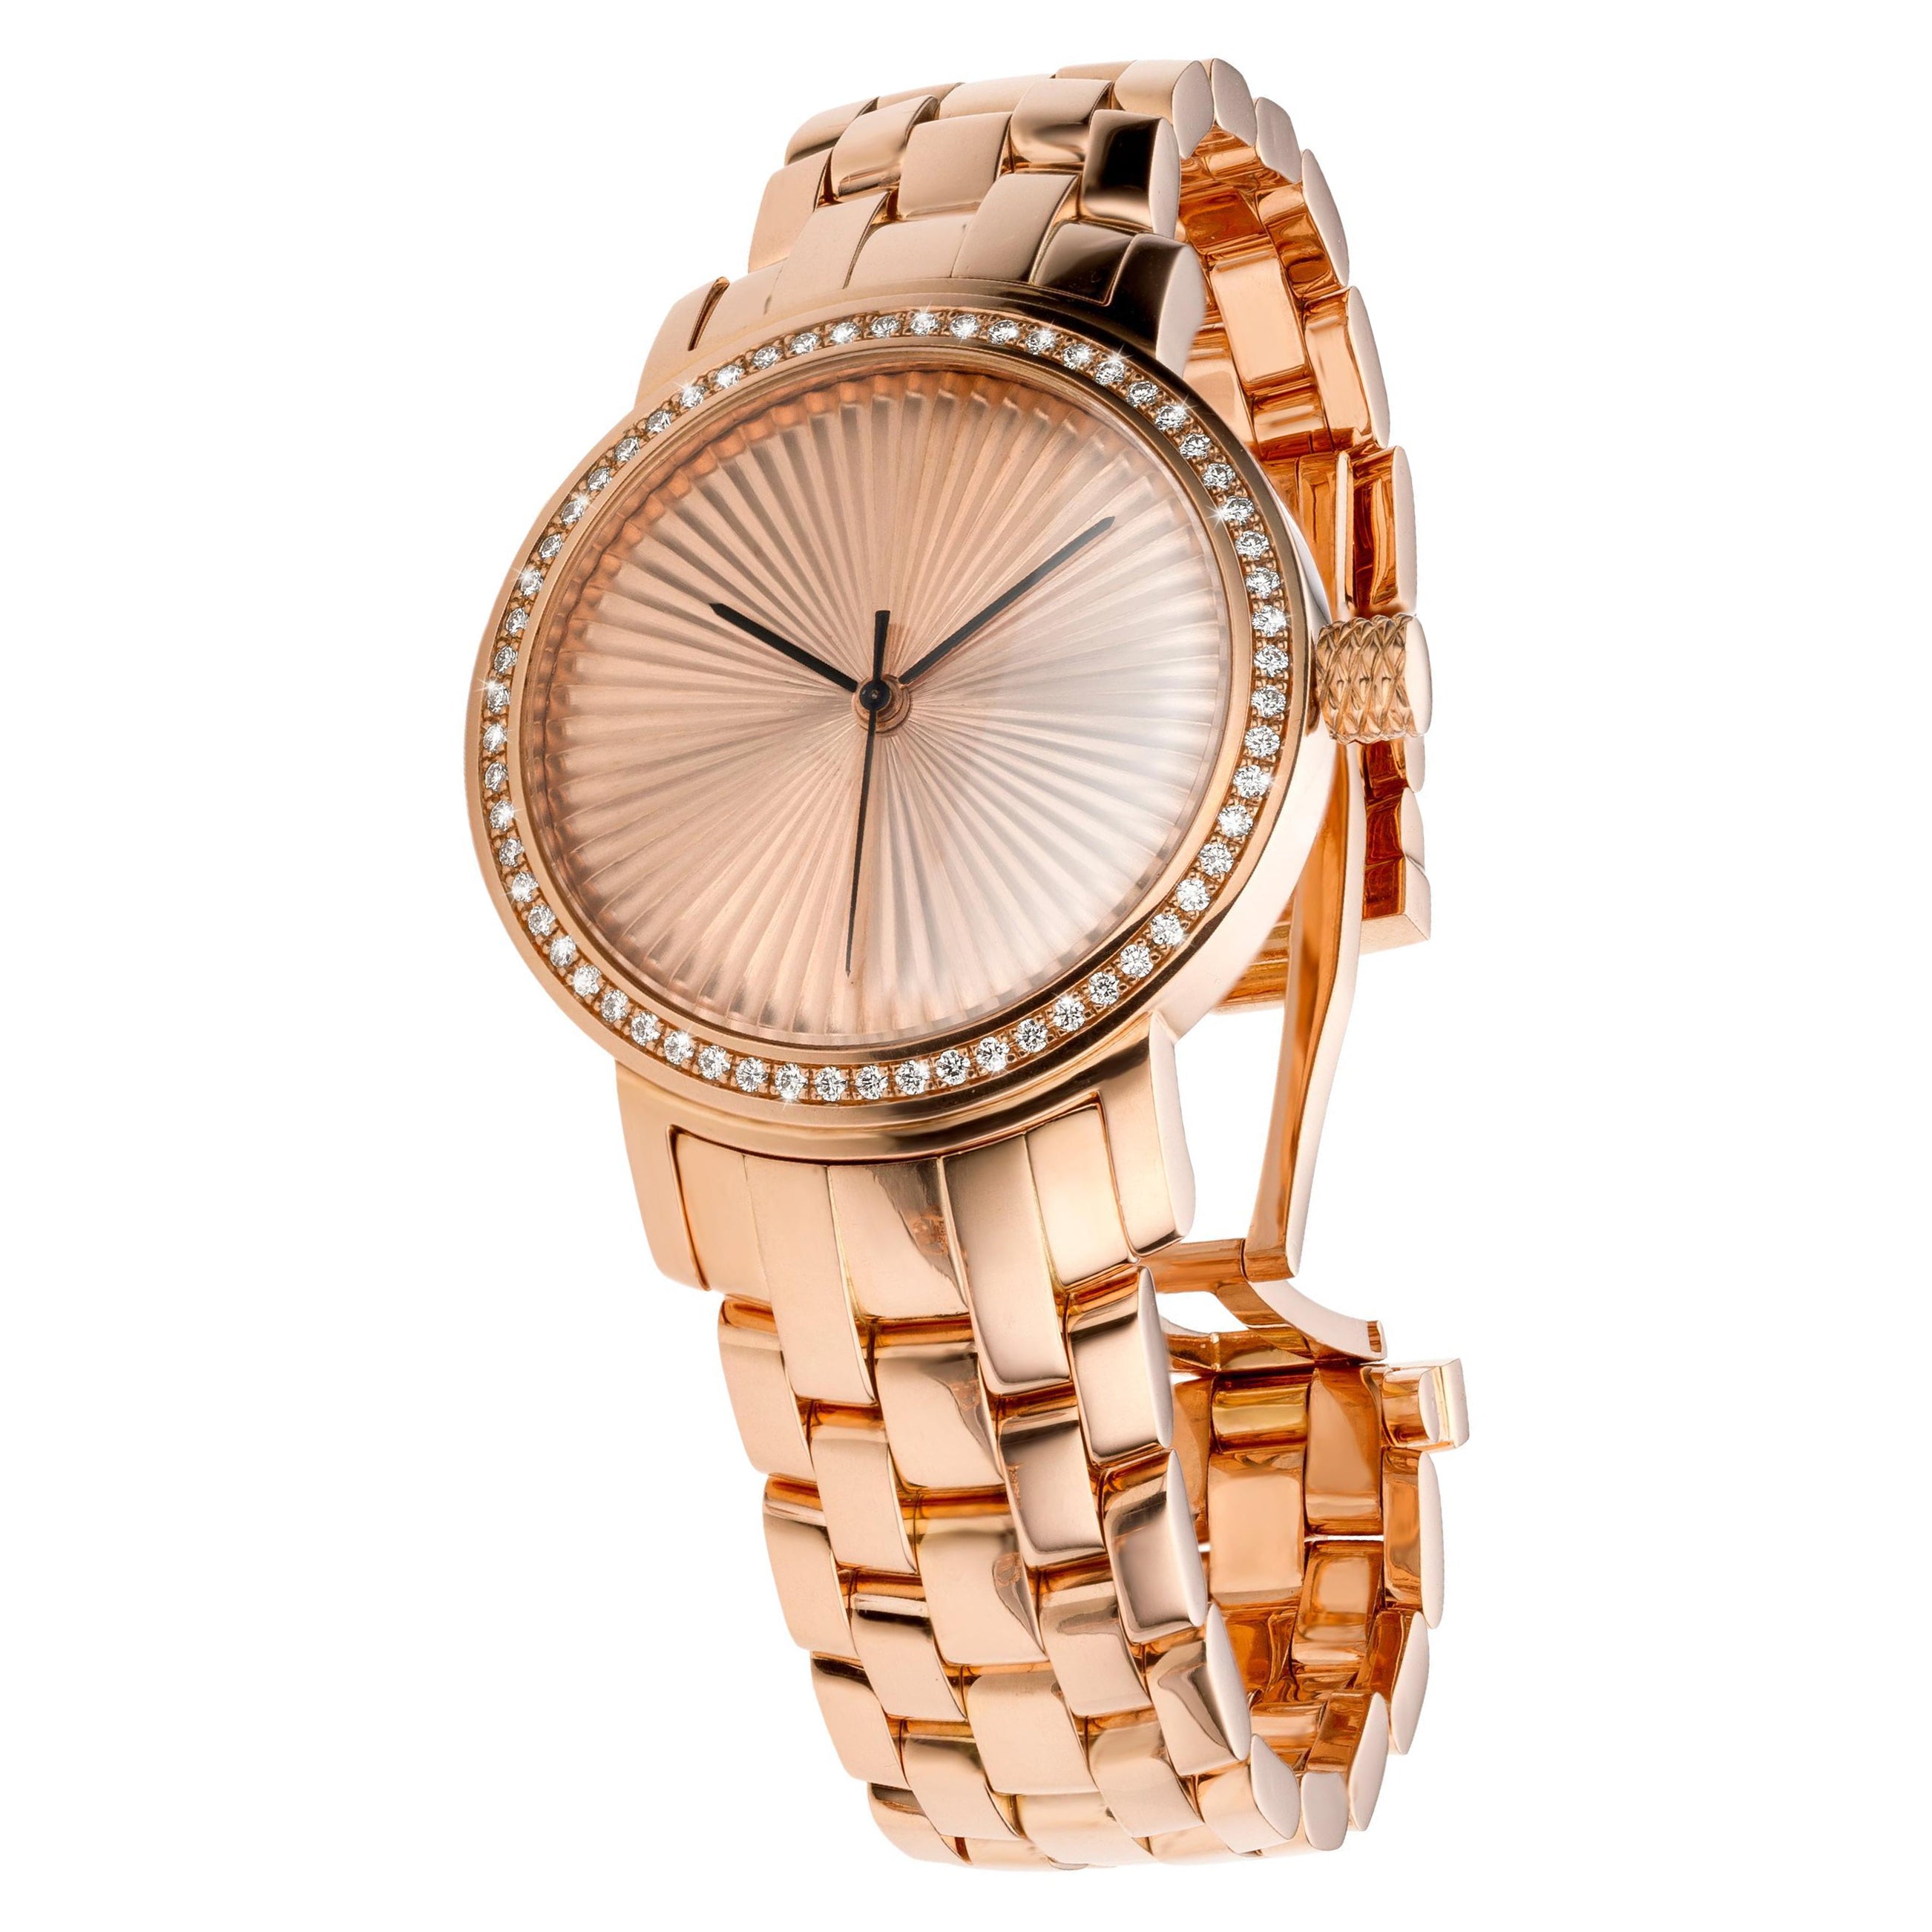 Cober “Nº2” Ladies Rosé Gold with 60 Diamonds Wristwatch in stock and handmade